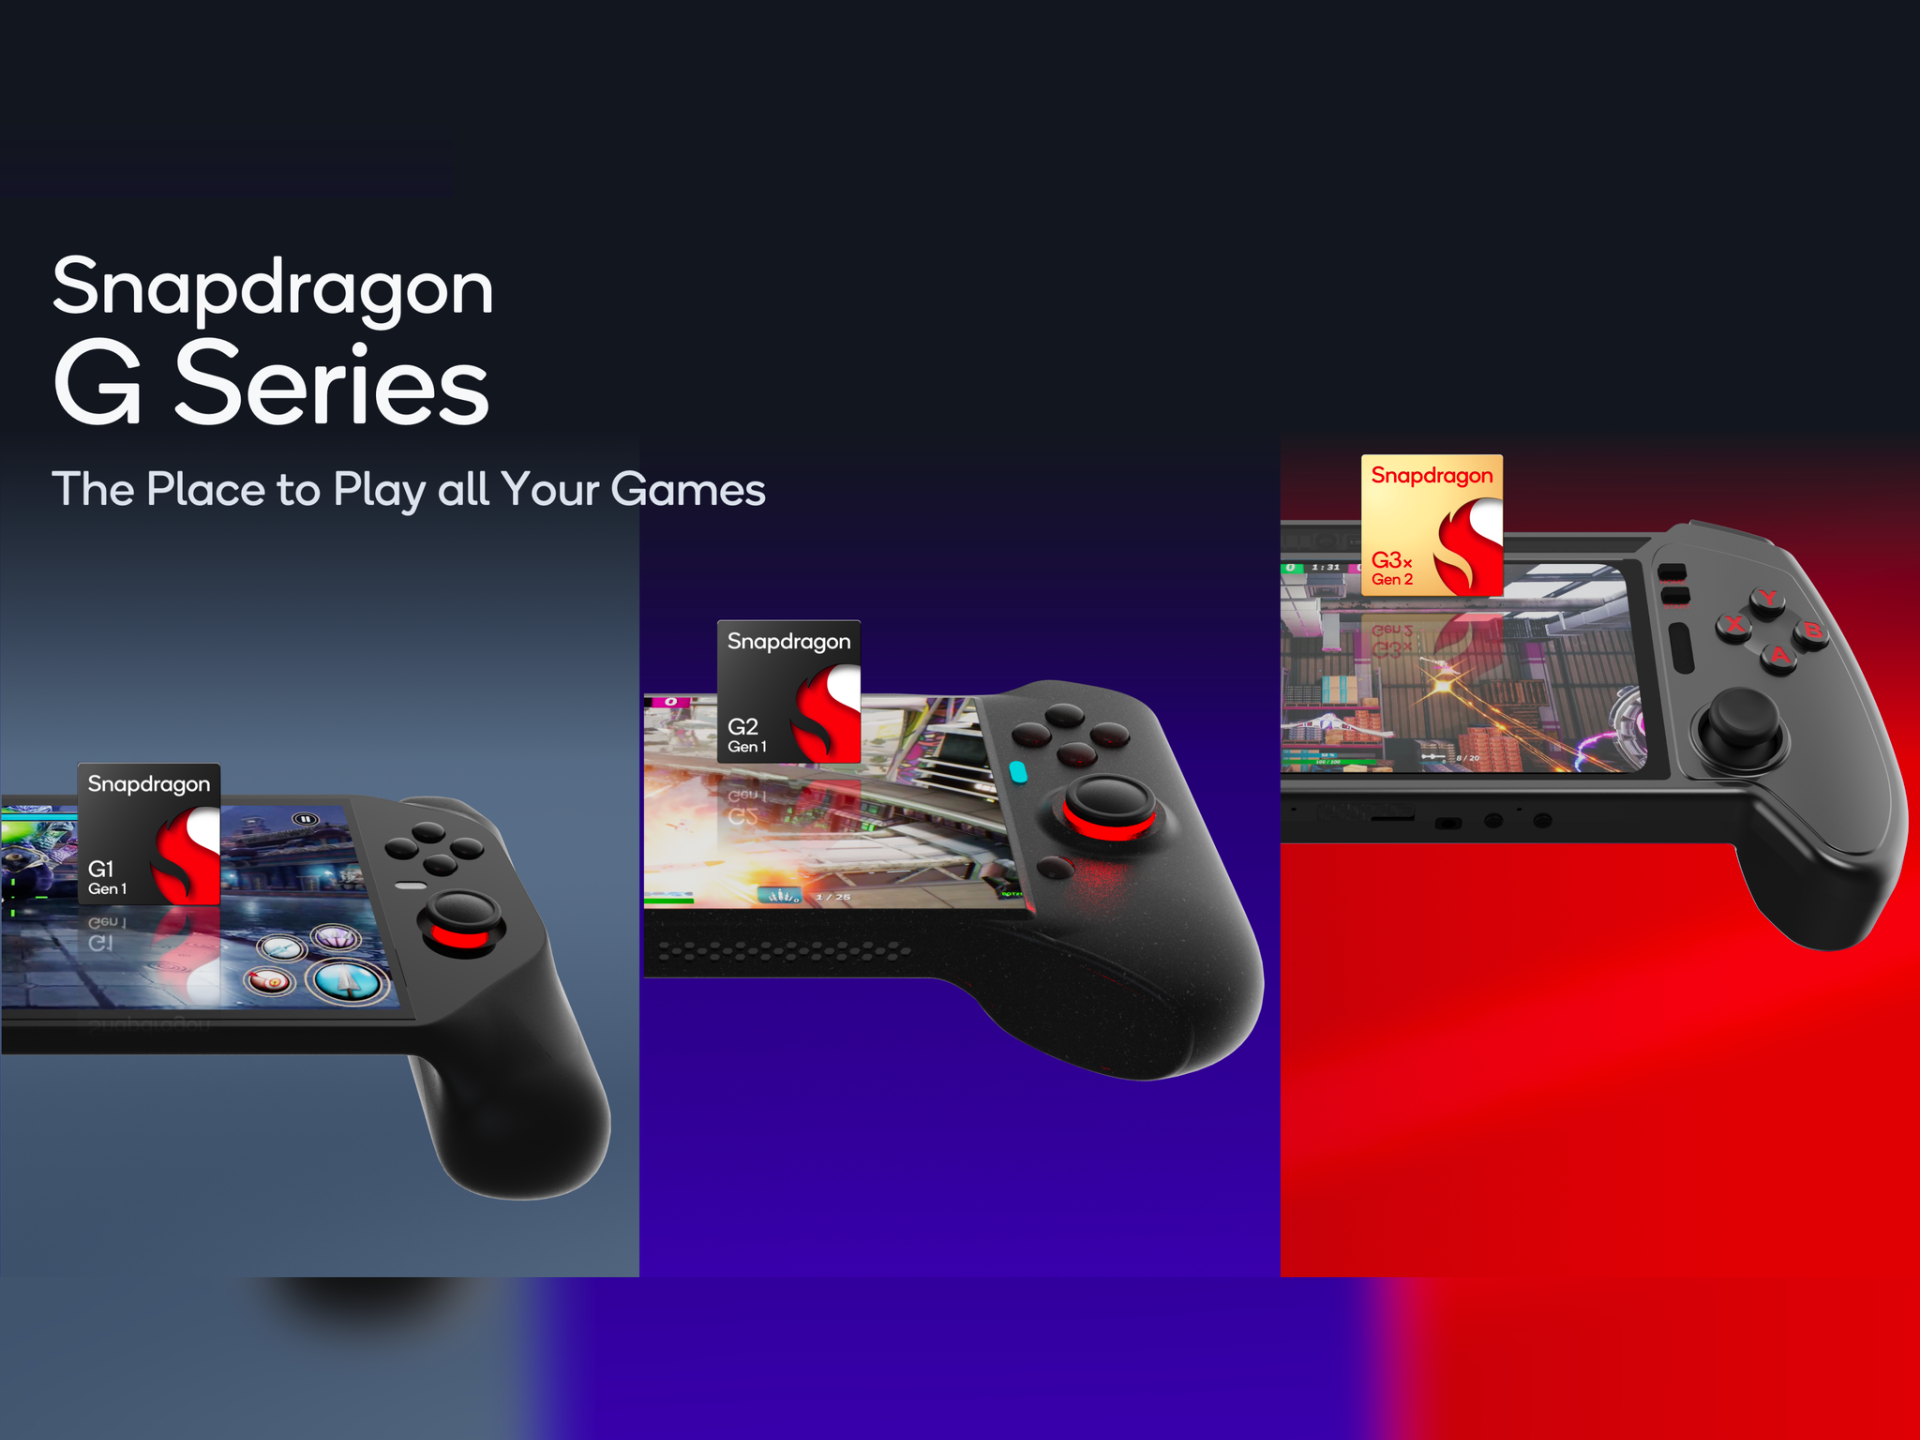 Qualcomm unveils new Snapdragon G series chips for gaming consoles